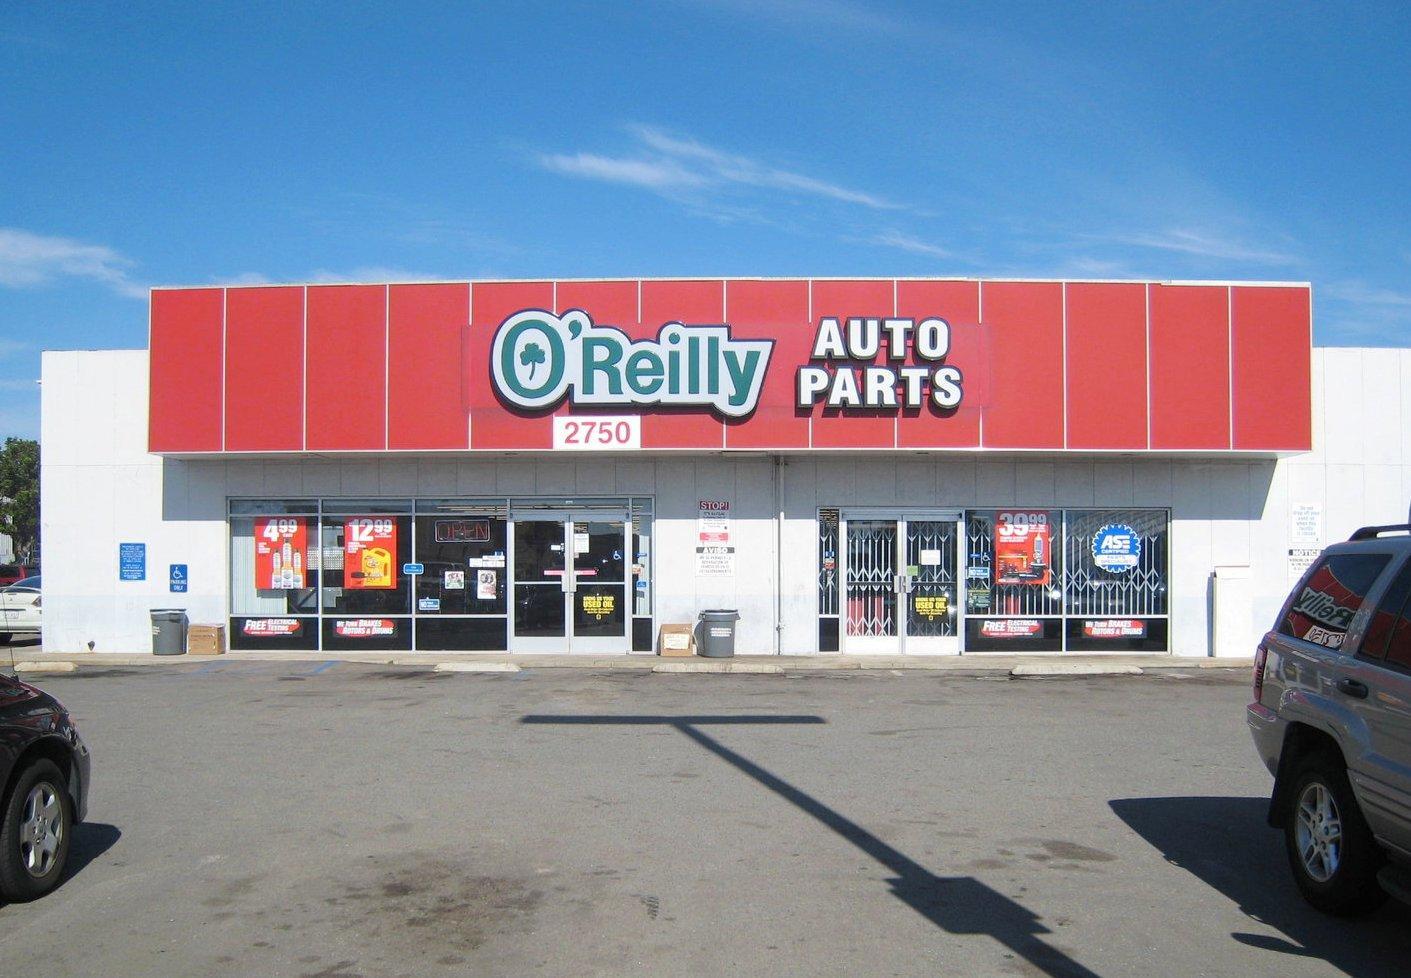 O'Reilly Auto Parts Coupons near me in San Diego | 8coupons